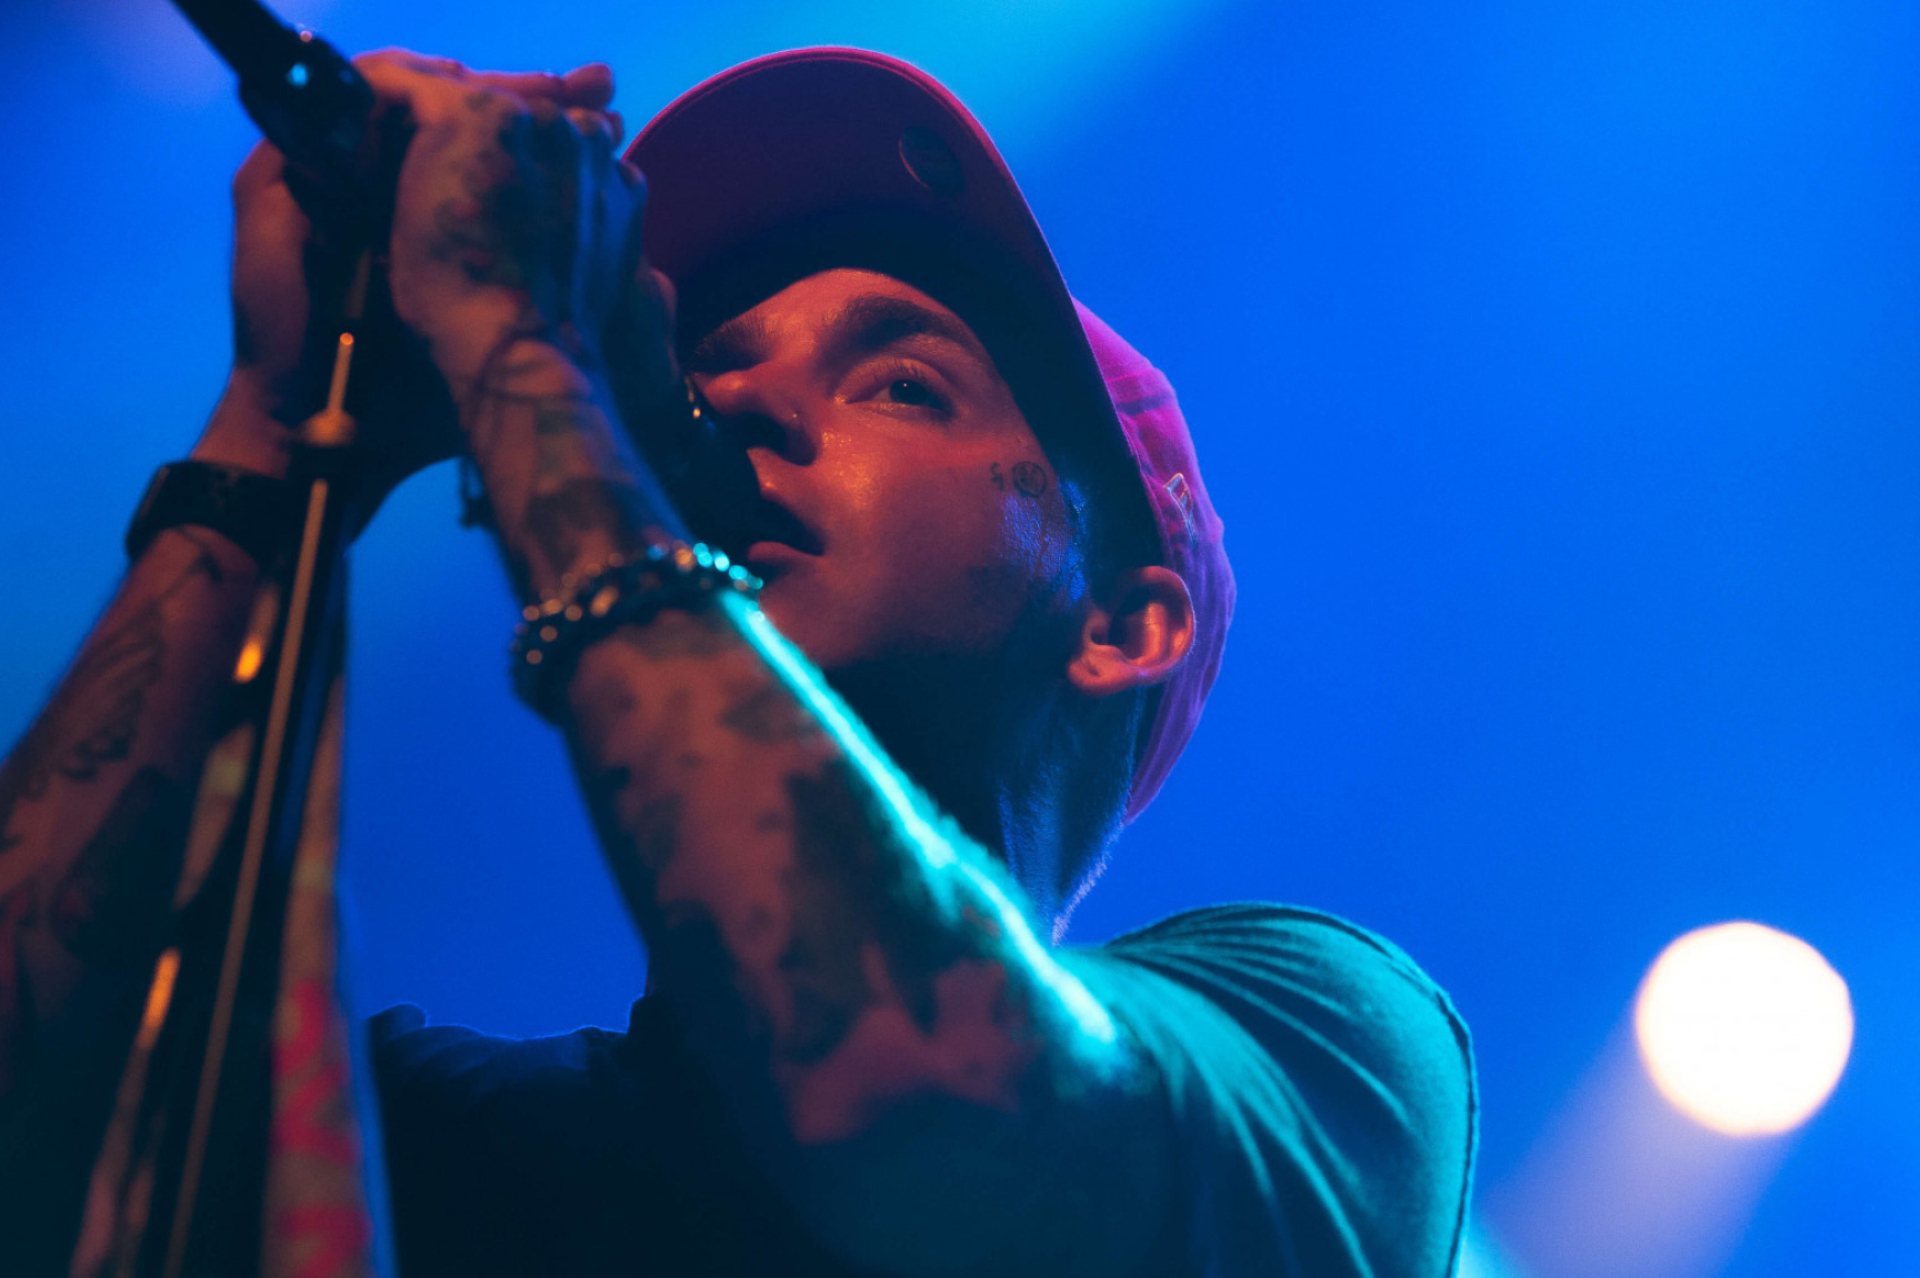 PHOTO REVIEW: Blackbear Gives It His All For Dutch Fans In Tilburg | Strife Magazine 1920x1280